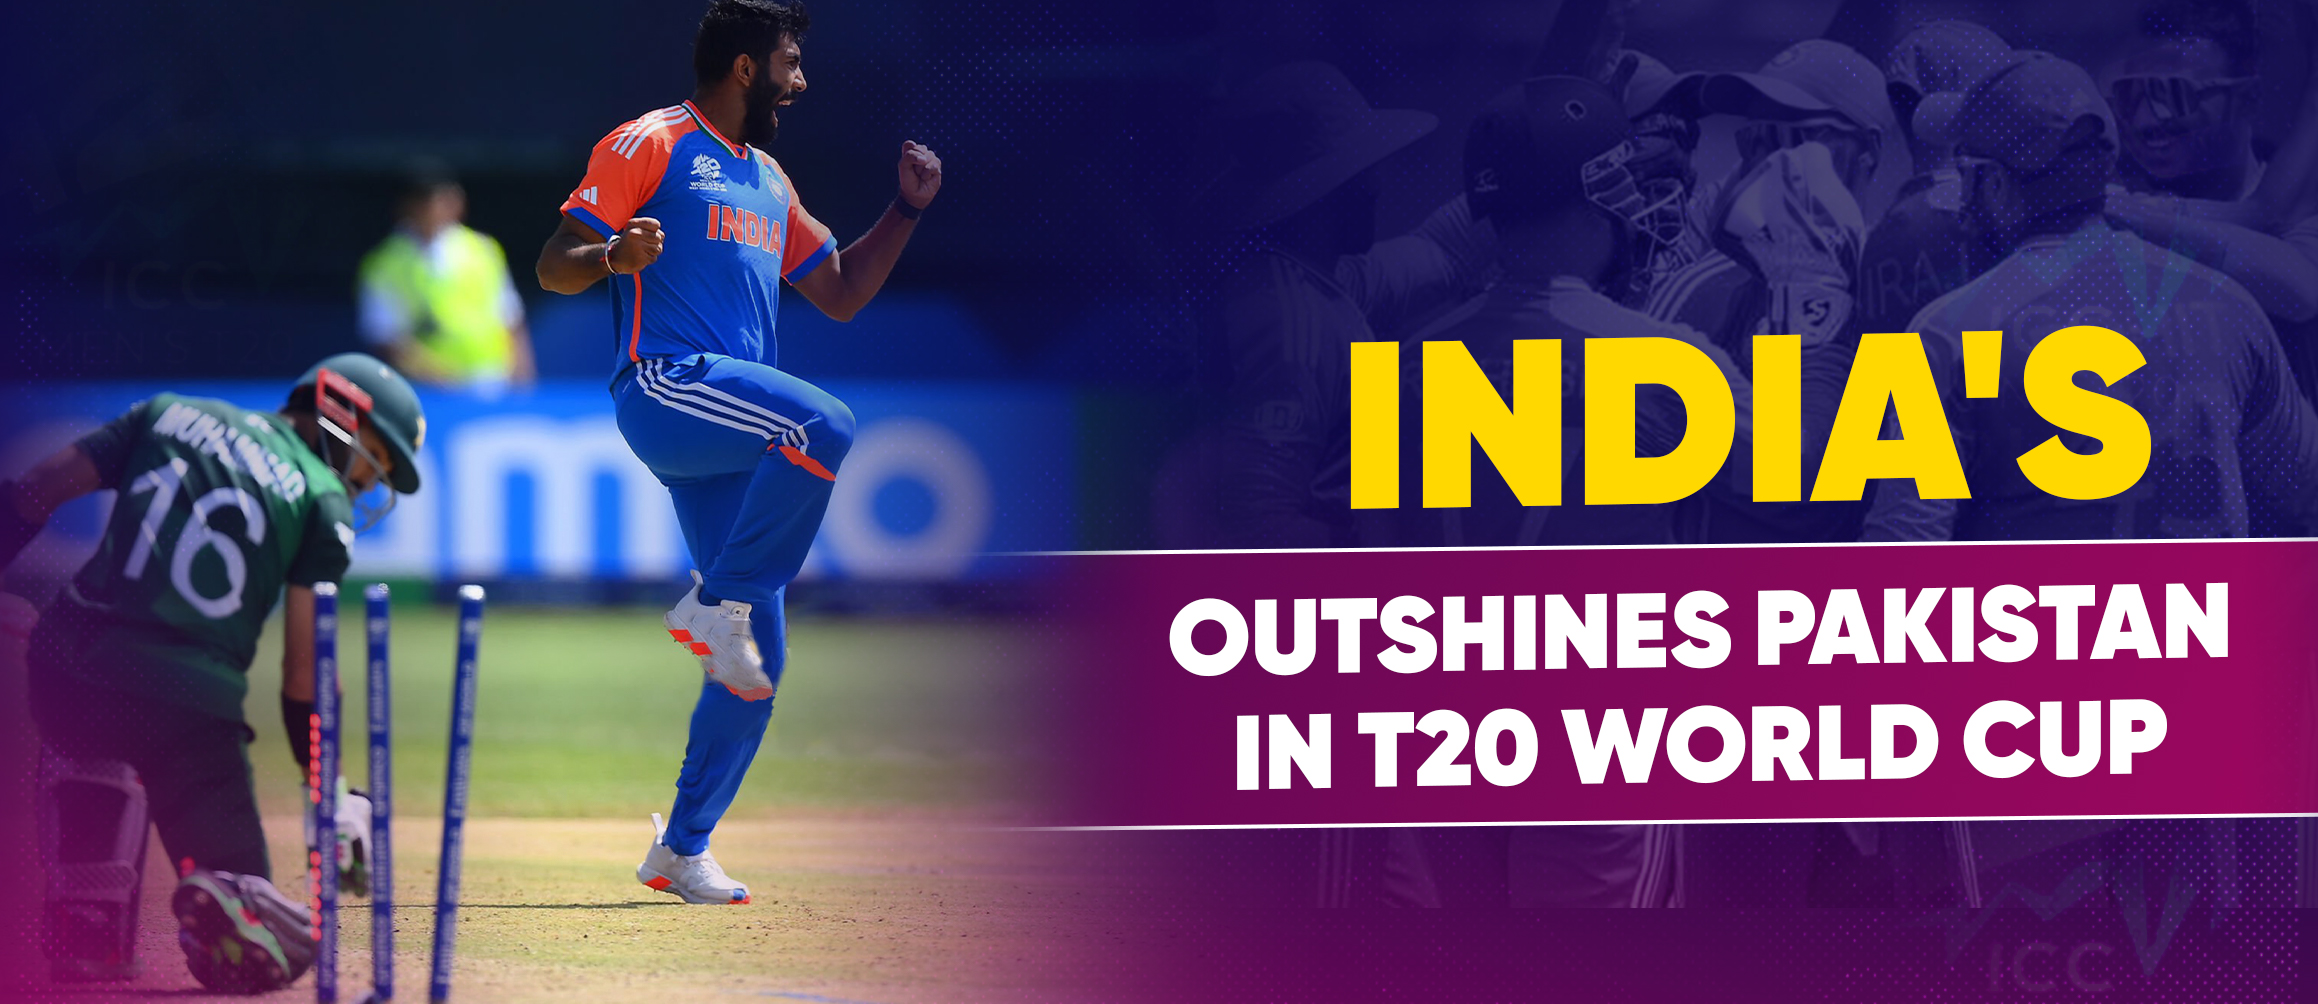 India’s Outshines Pakistan in T20 World Cup